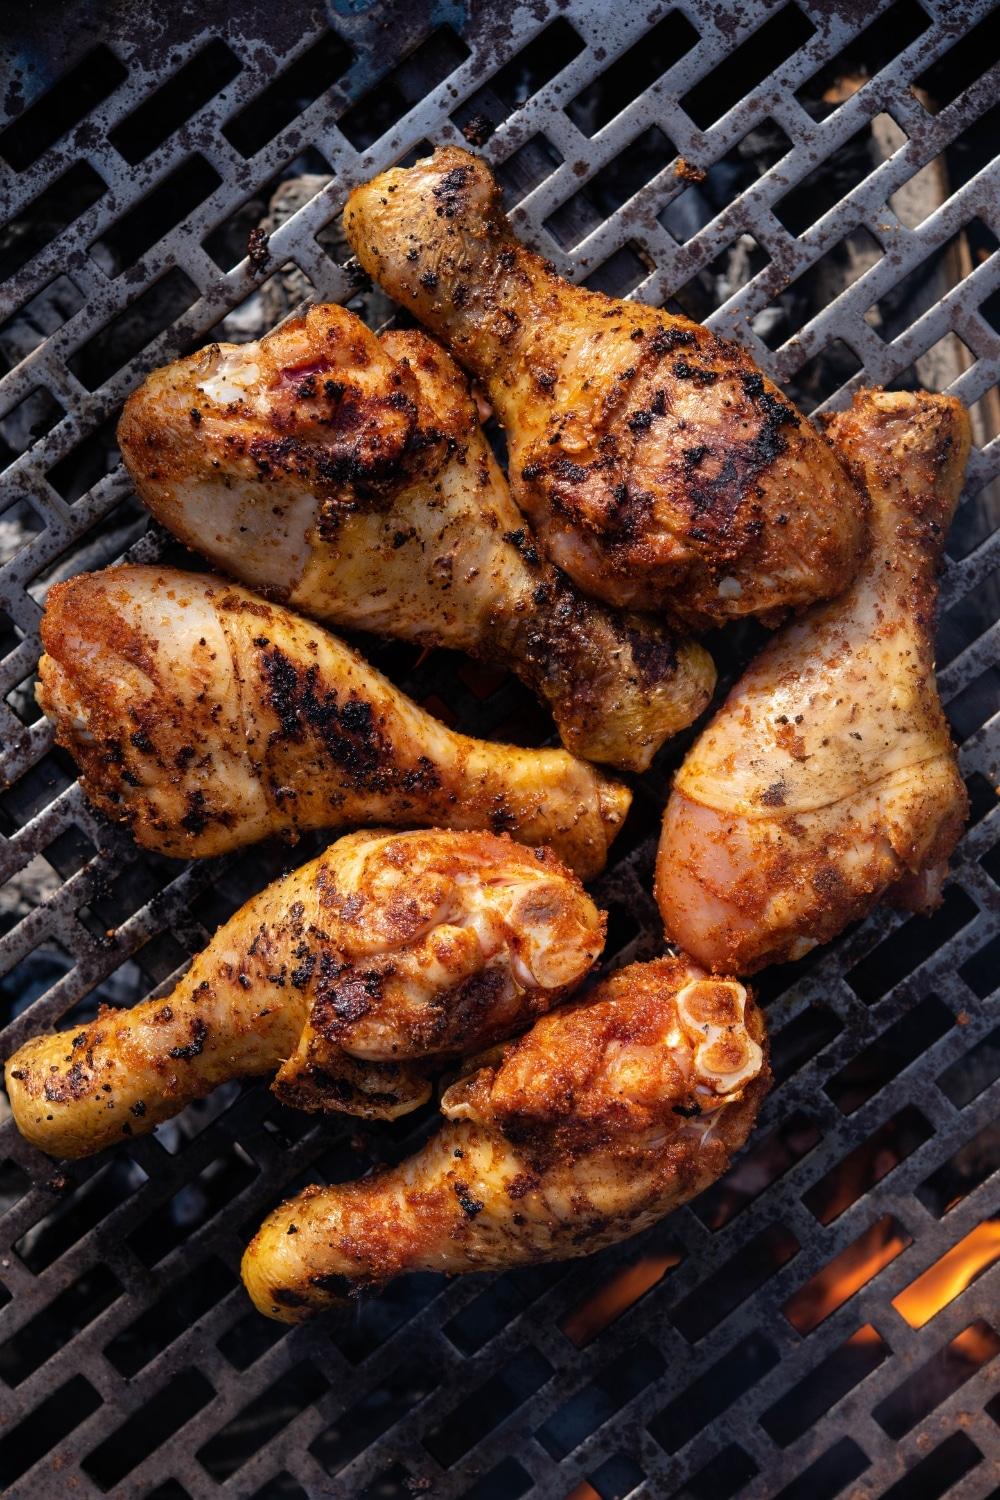 Seasoned chicken drumsticks cooking on a charcoal grill.